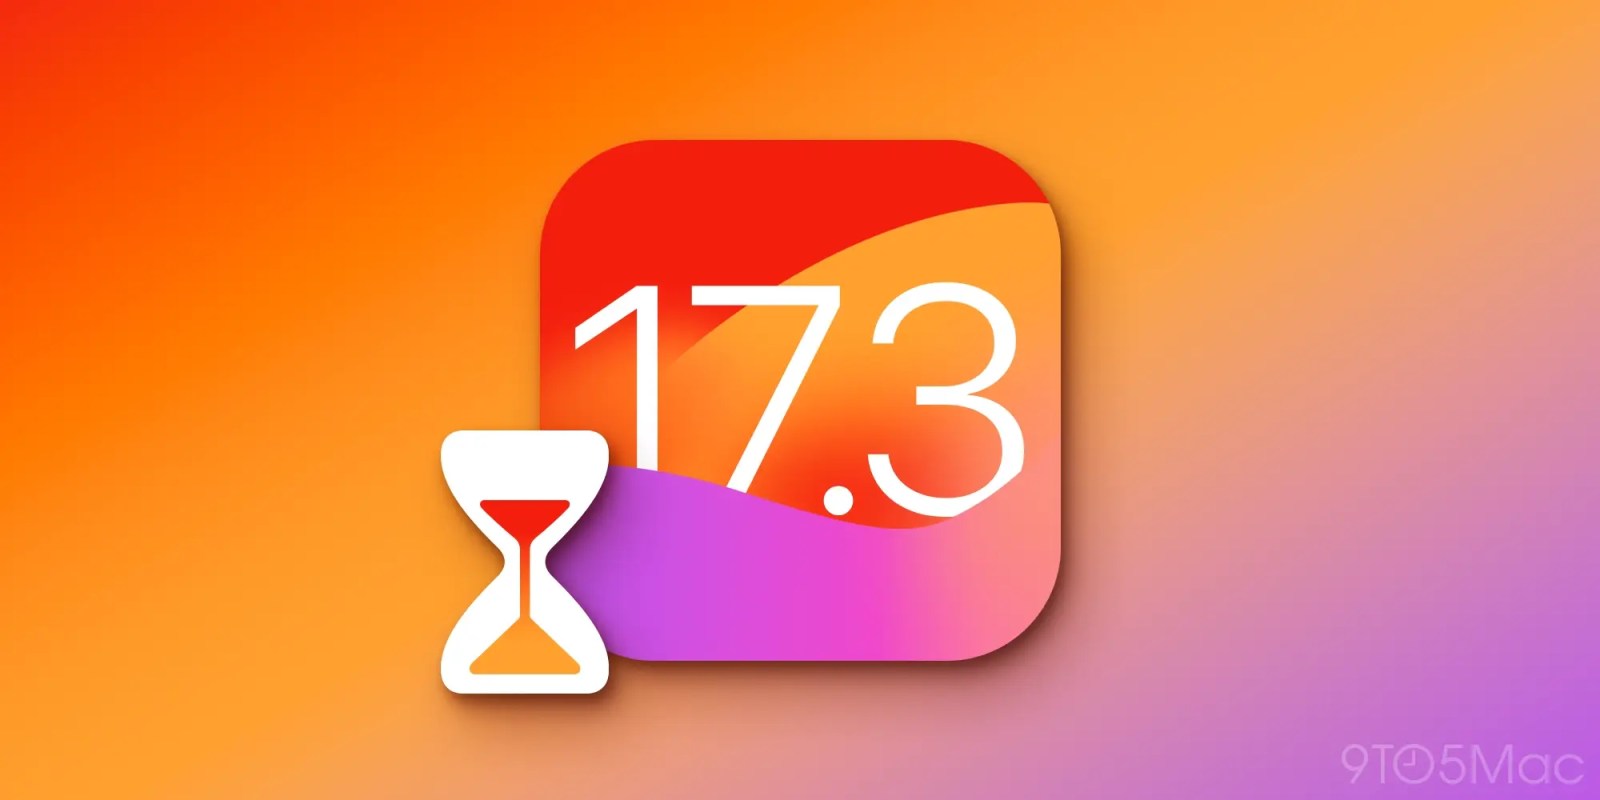 when does iOS 17.3 come out?